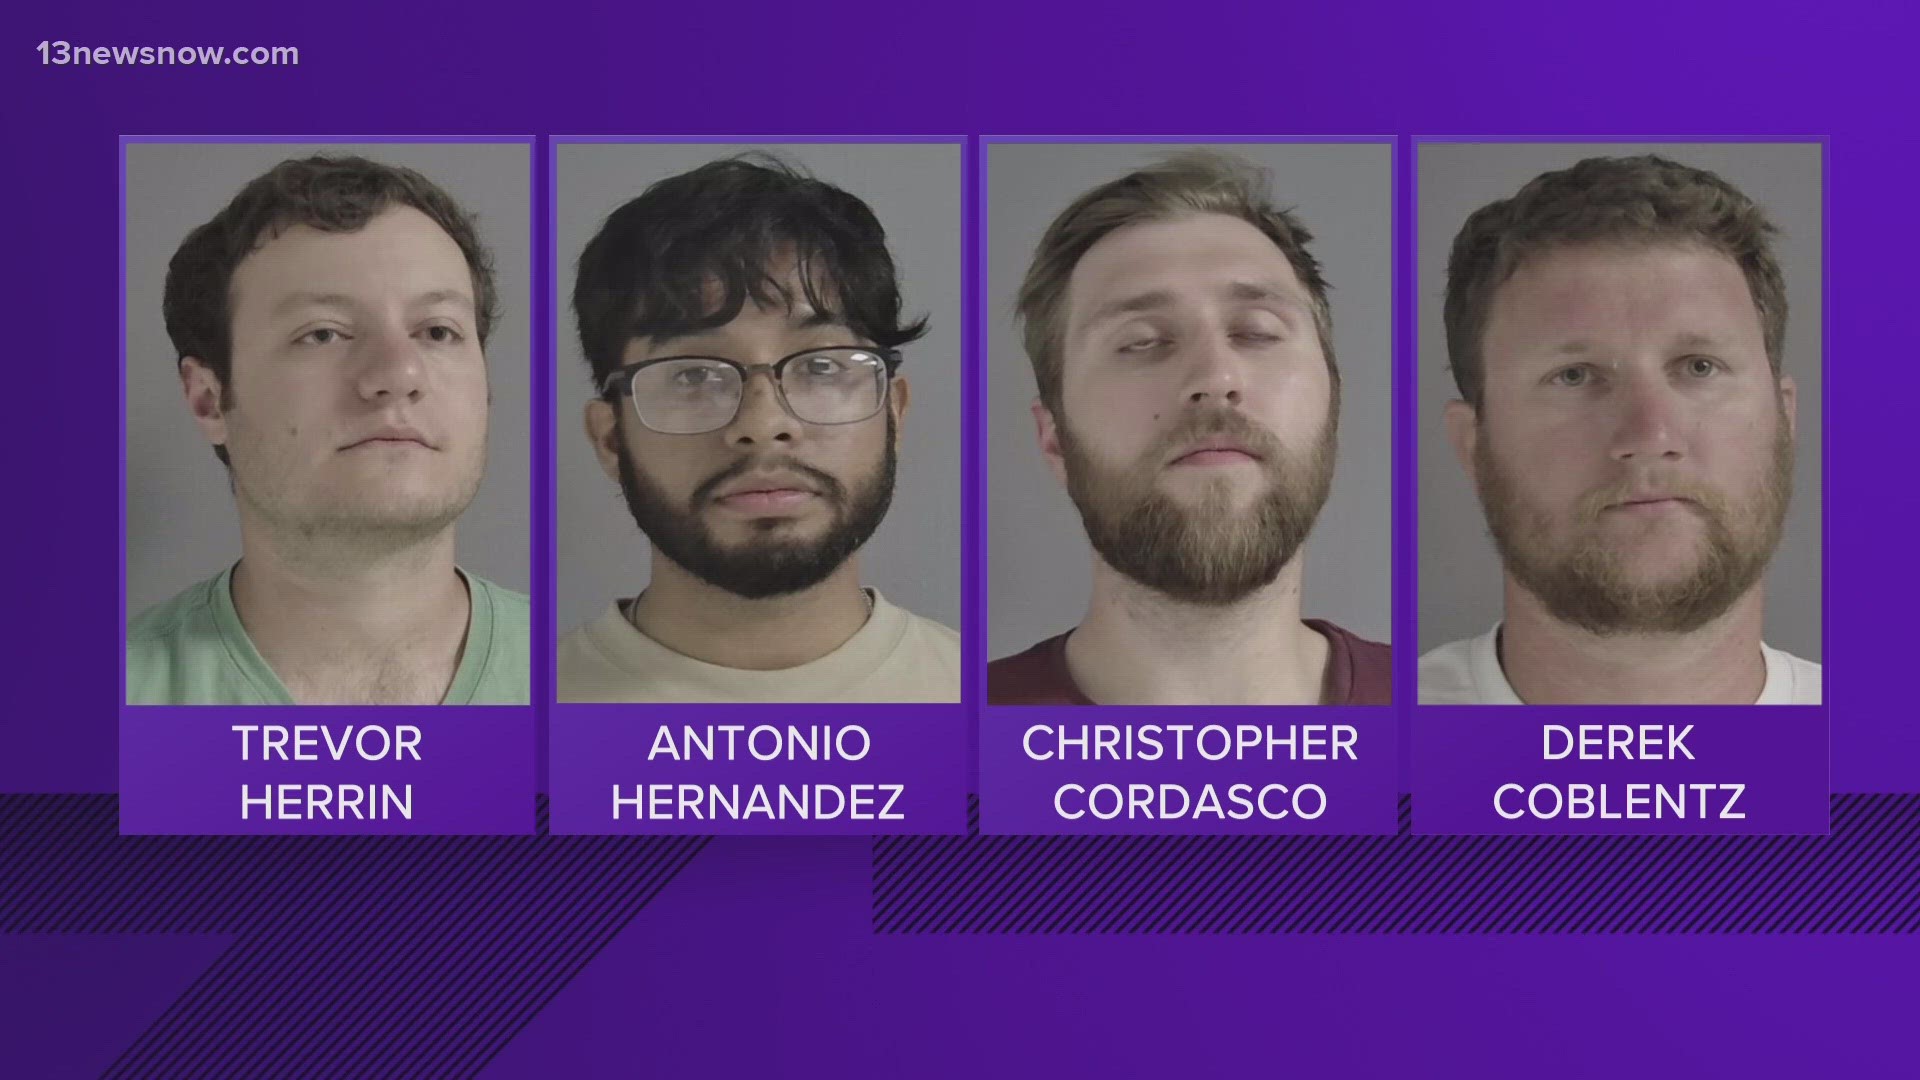 Gloucester County deputies have arrested four men they say brought weapons into a school board meeting